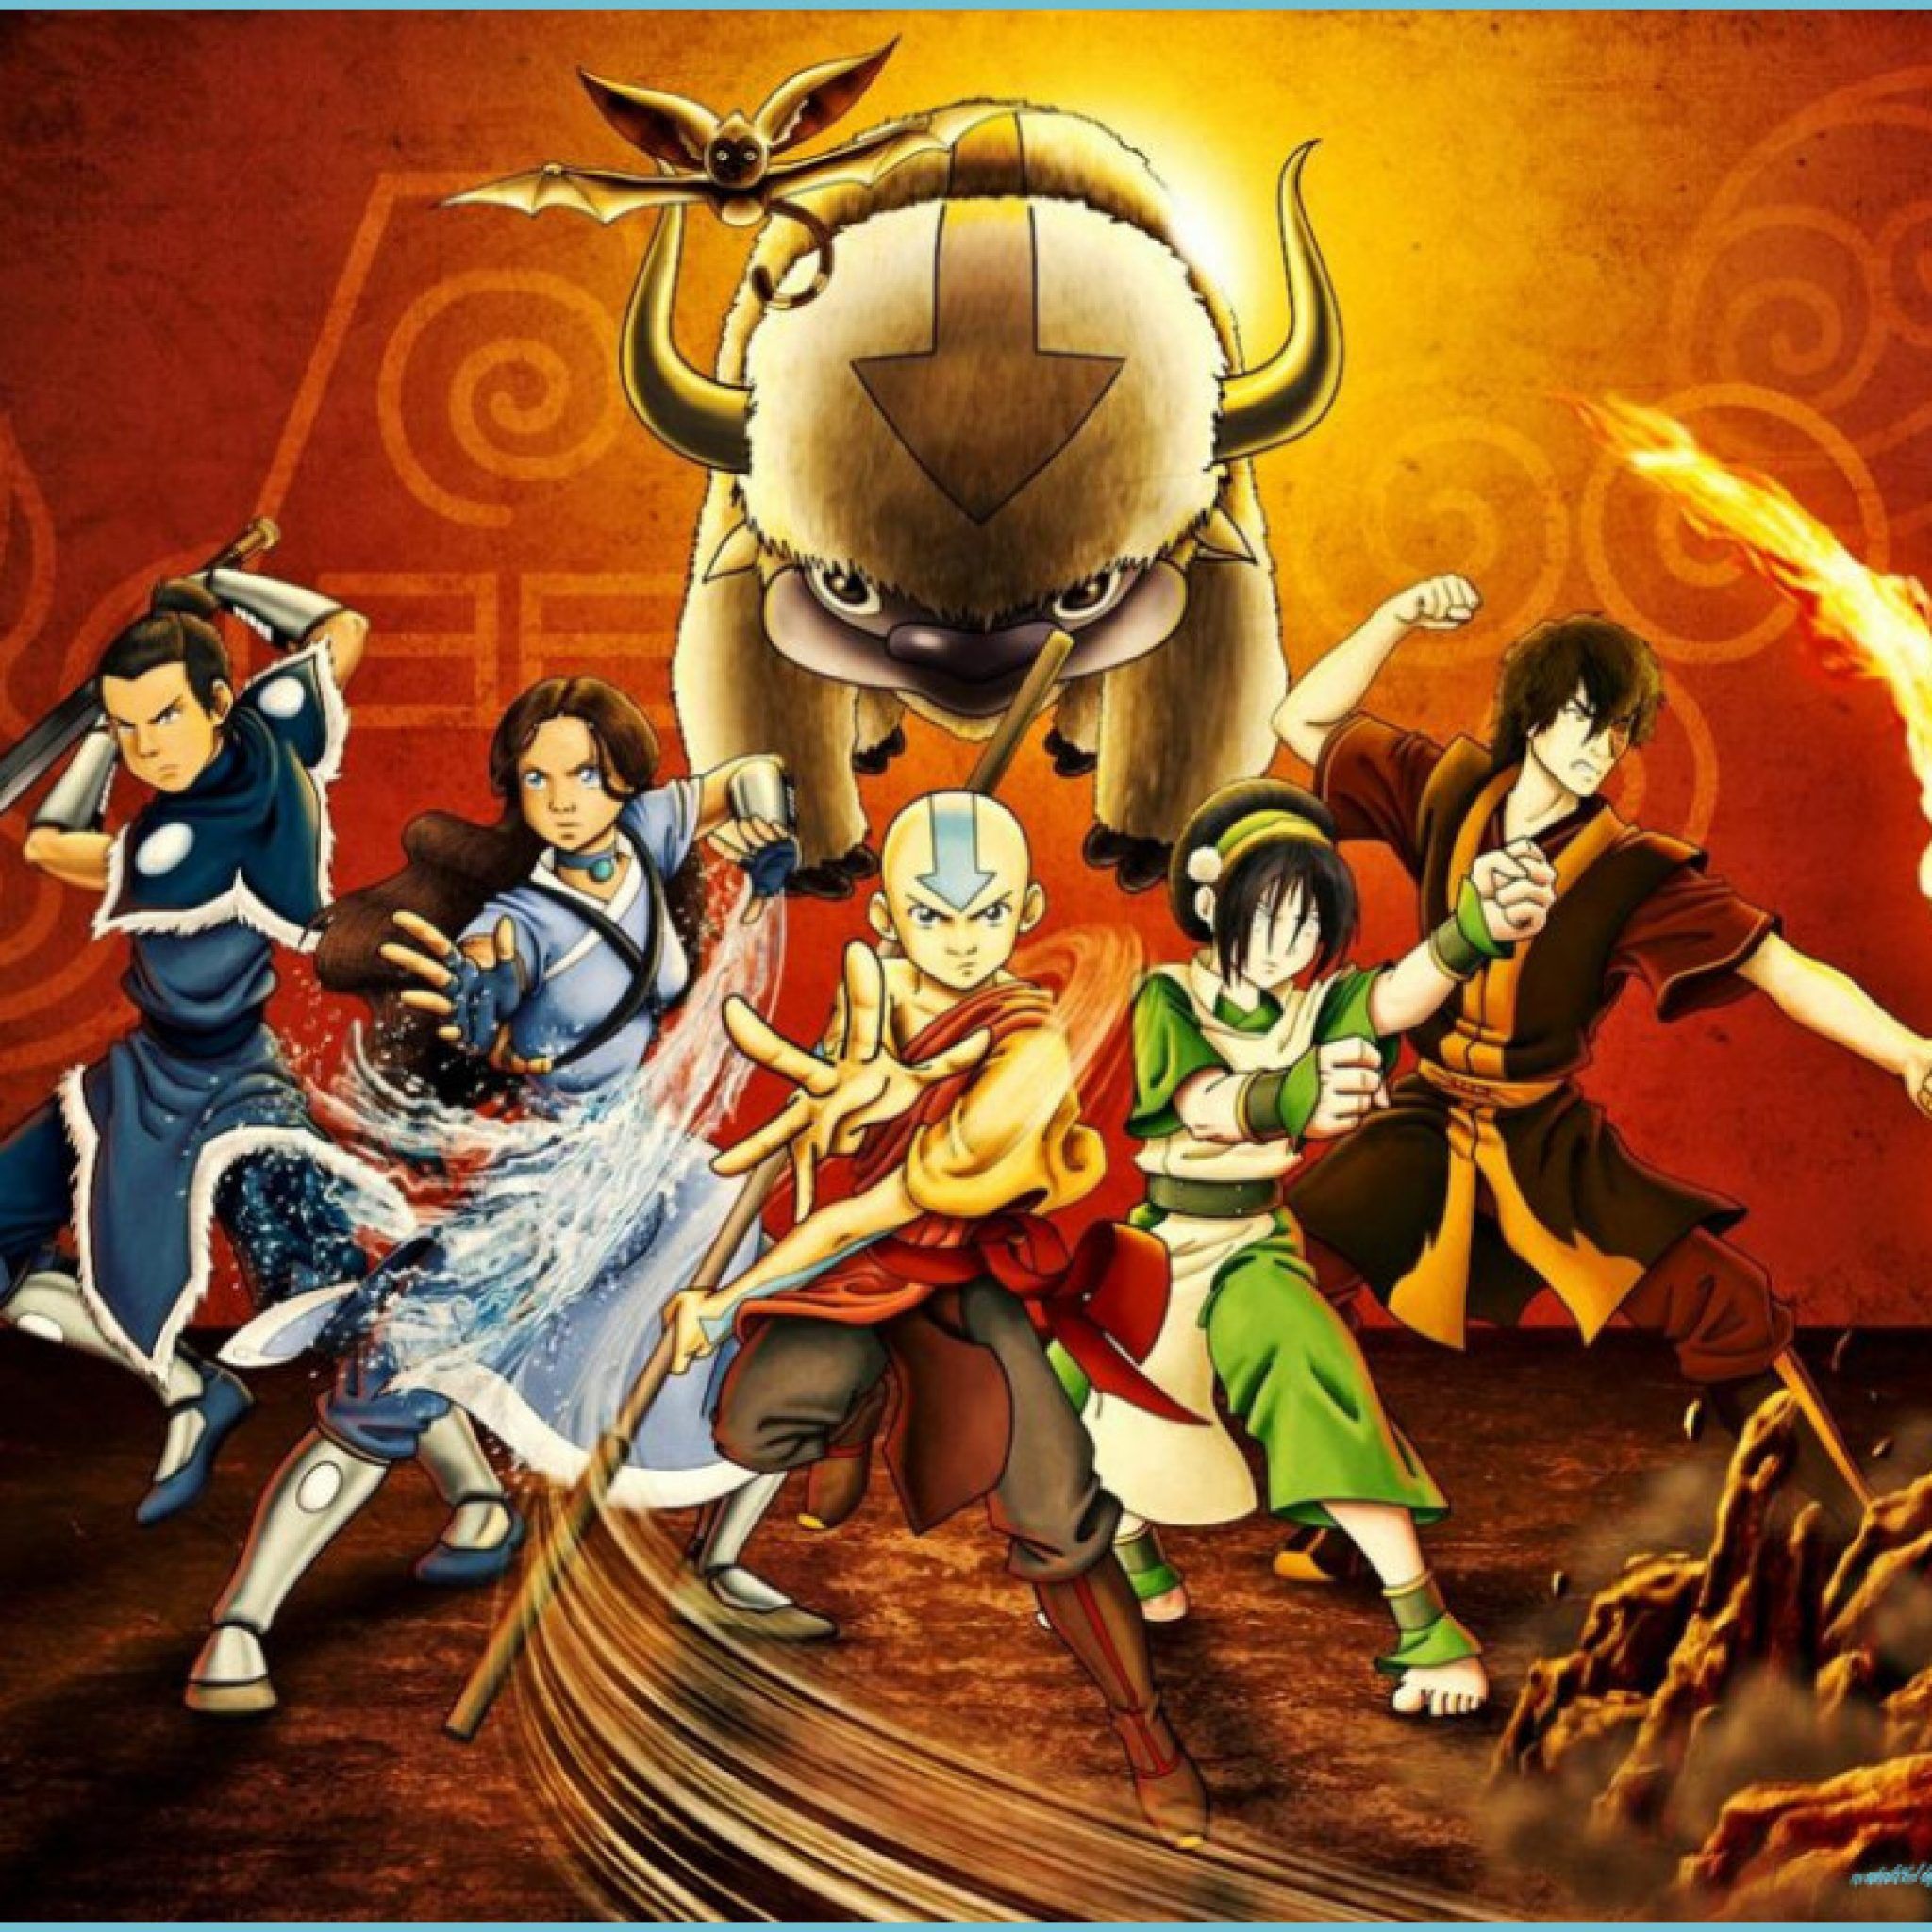 Avatar the last airbender wallpaper by turtlesrawesome8 on legend of aang wallpaper